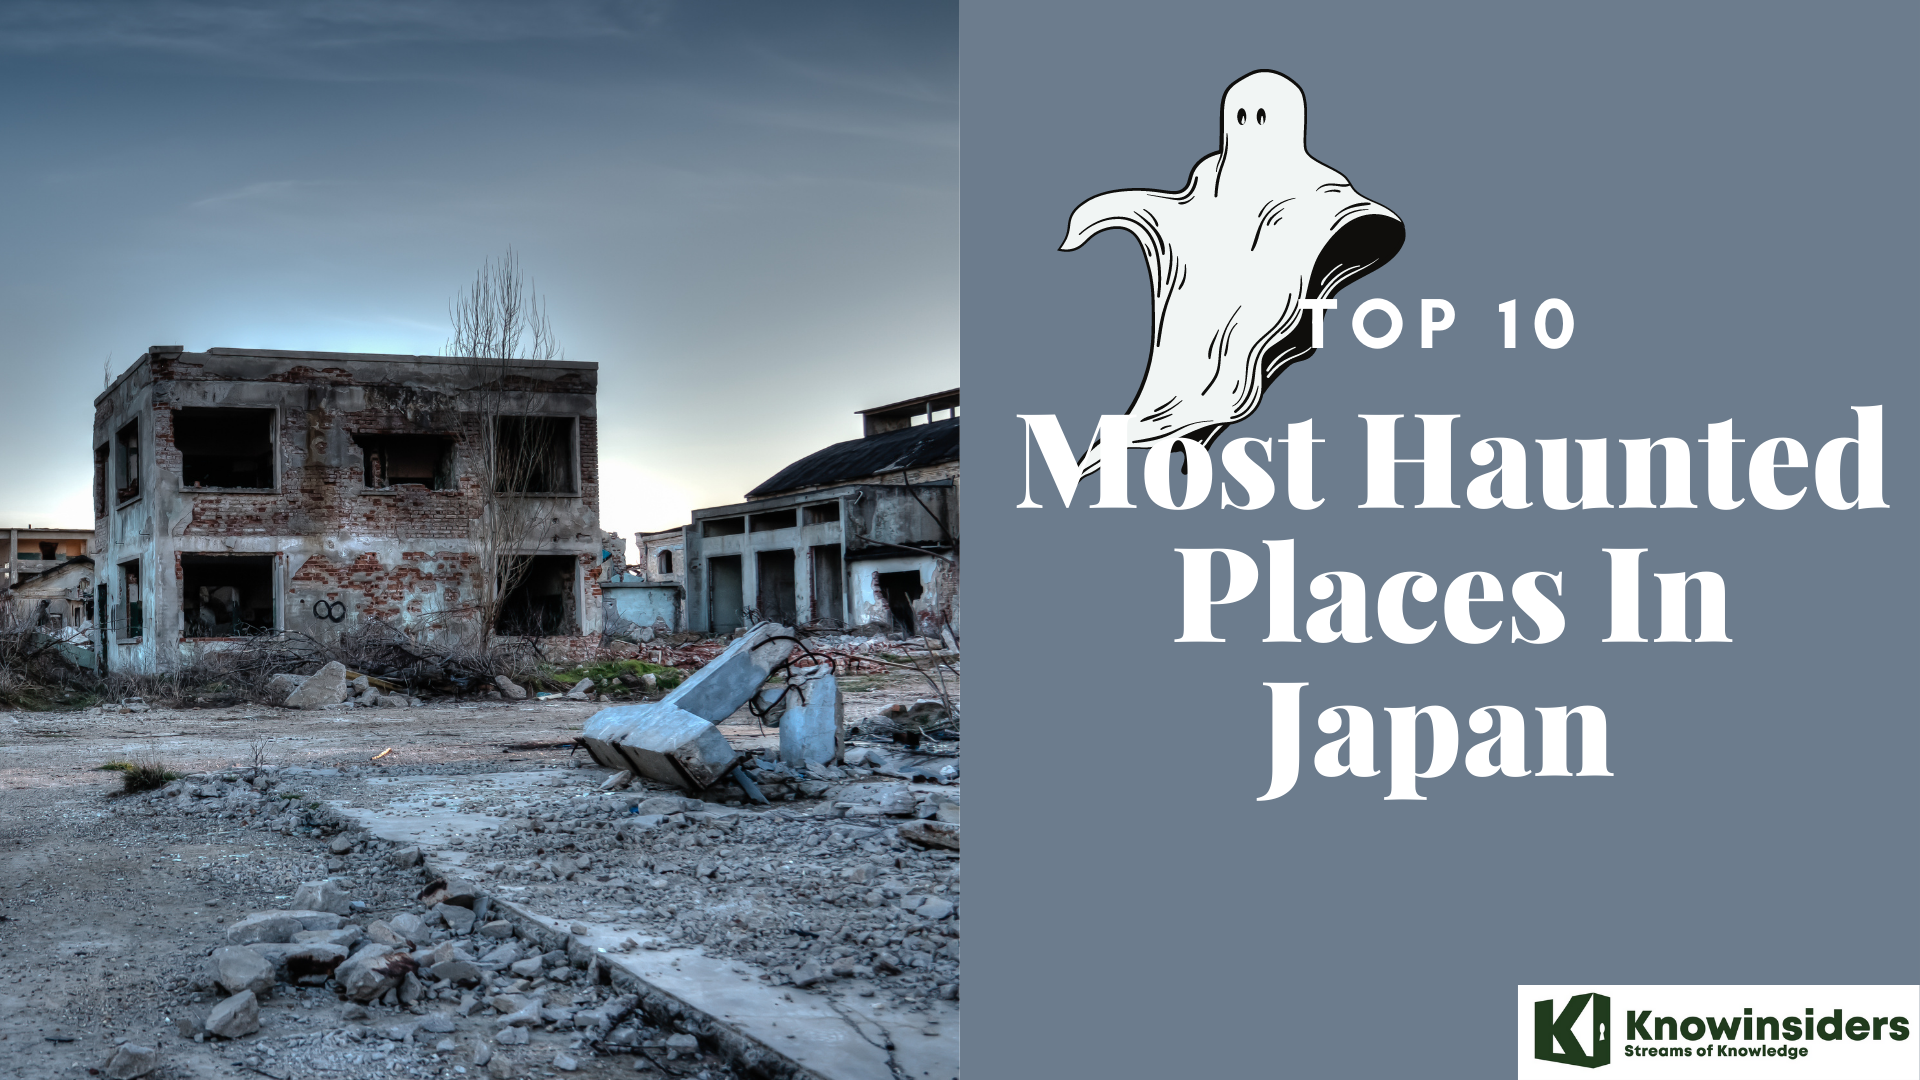 Top 10 Most Haunted & Ghost Places in Japan